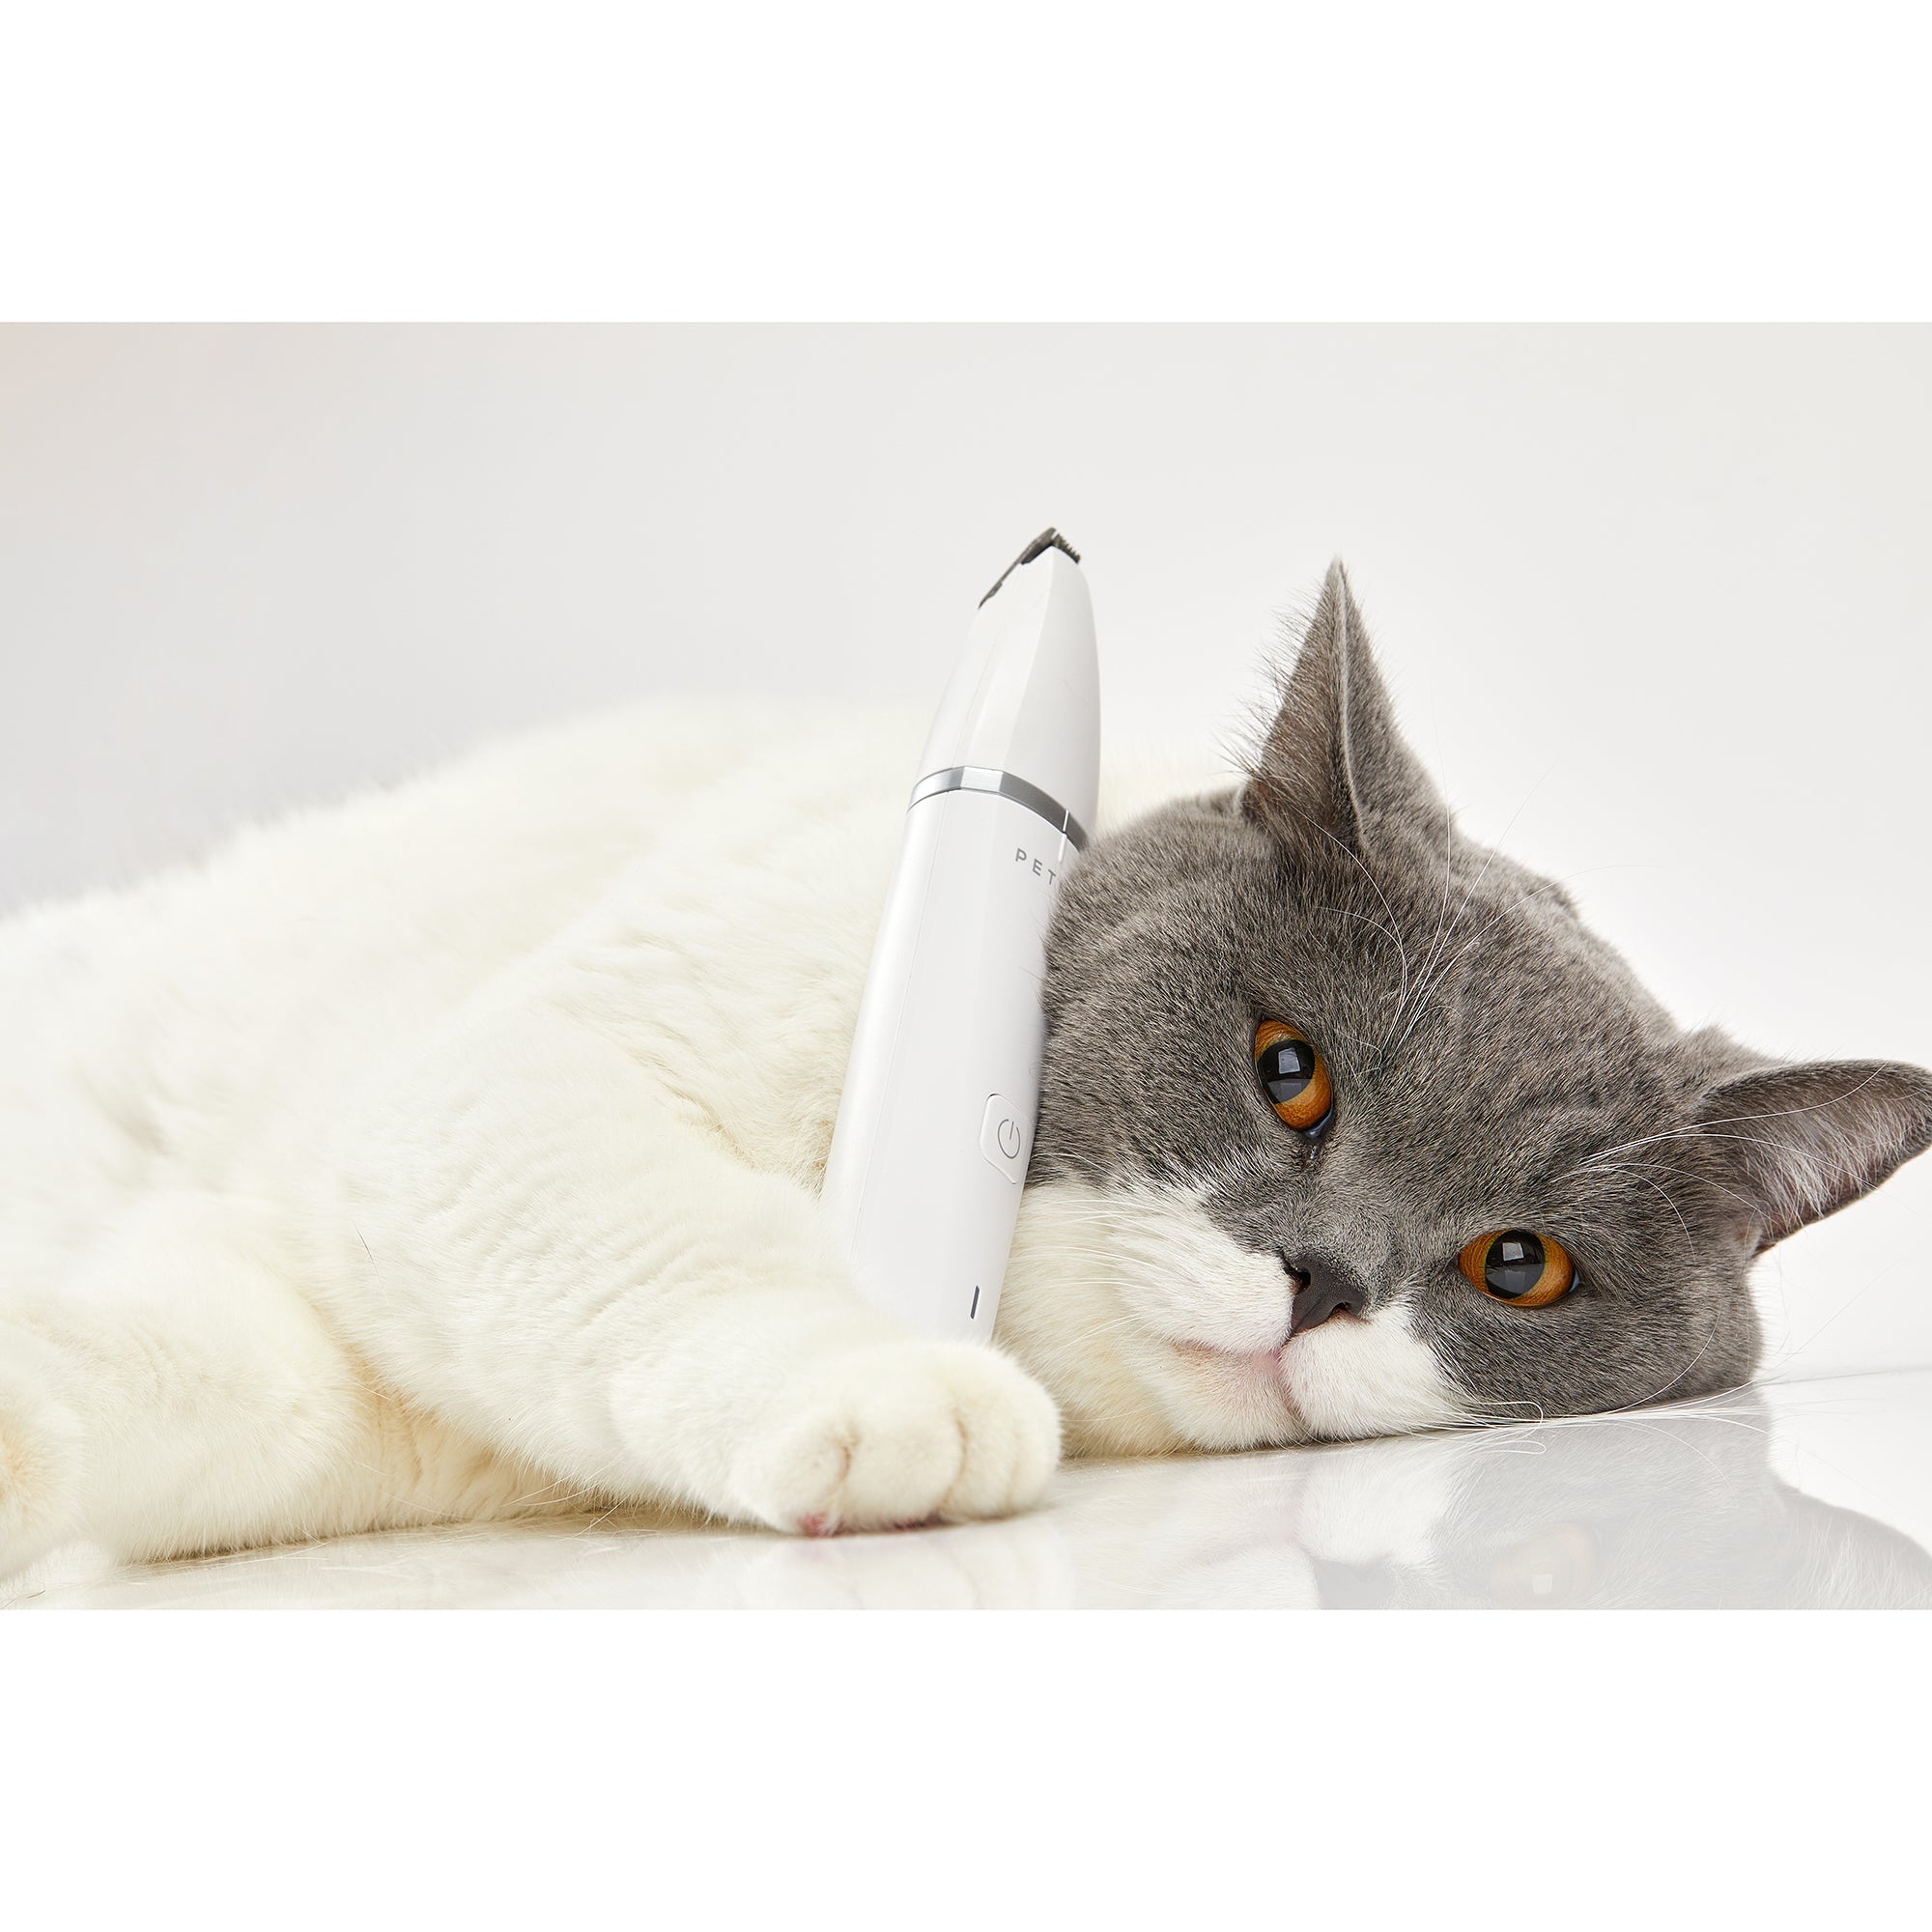 2 in 1 Pet Trimmer for Both Cats and Dogs